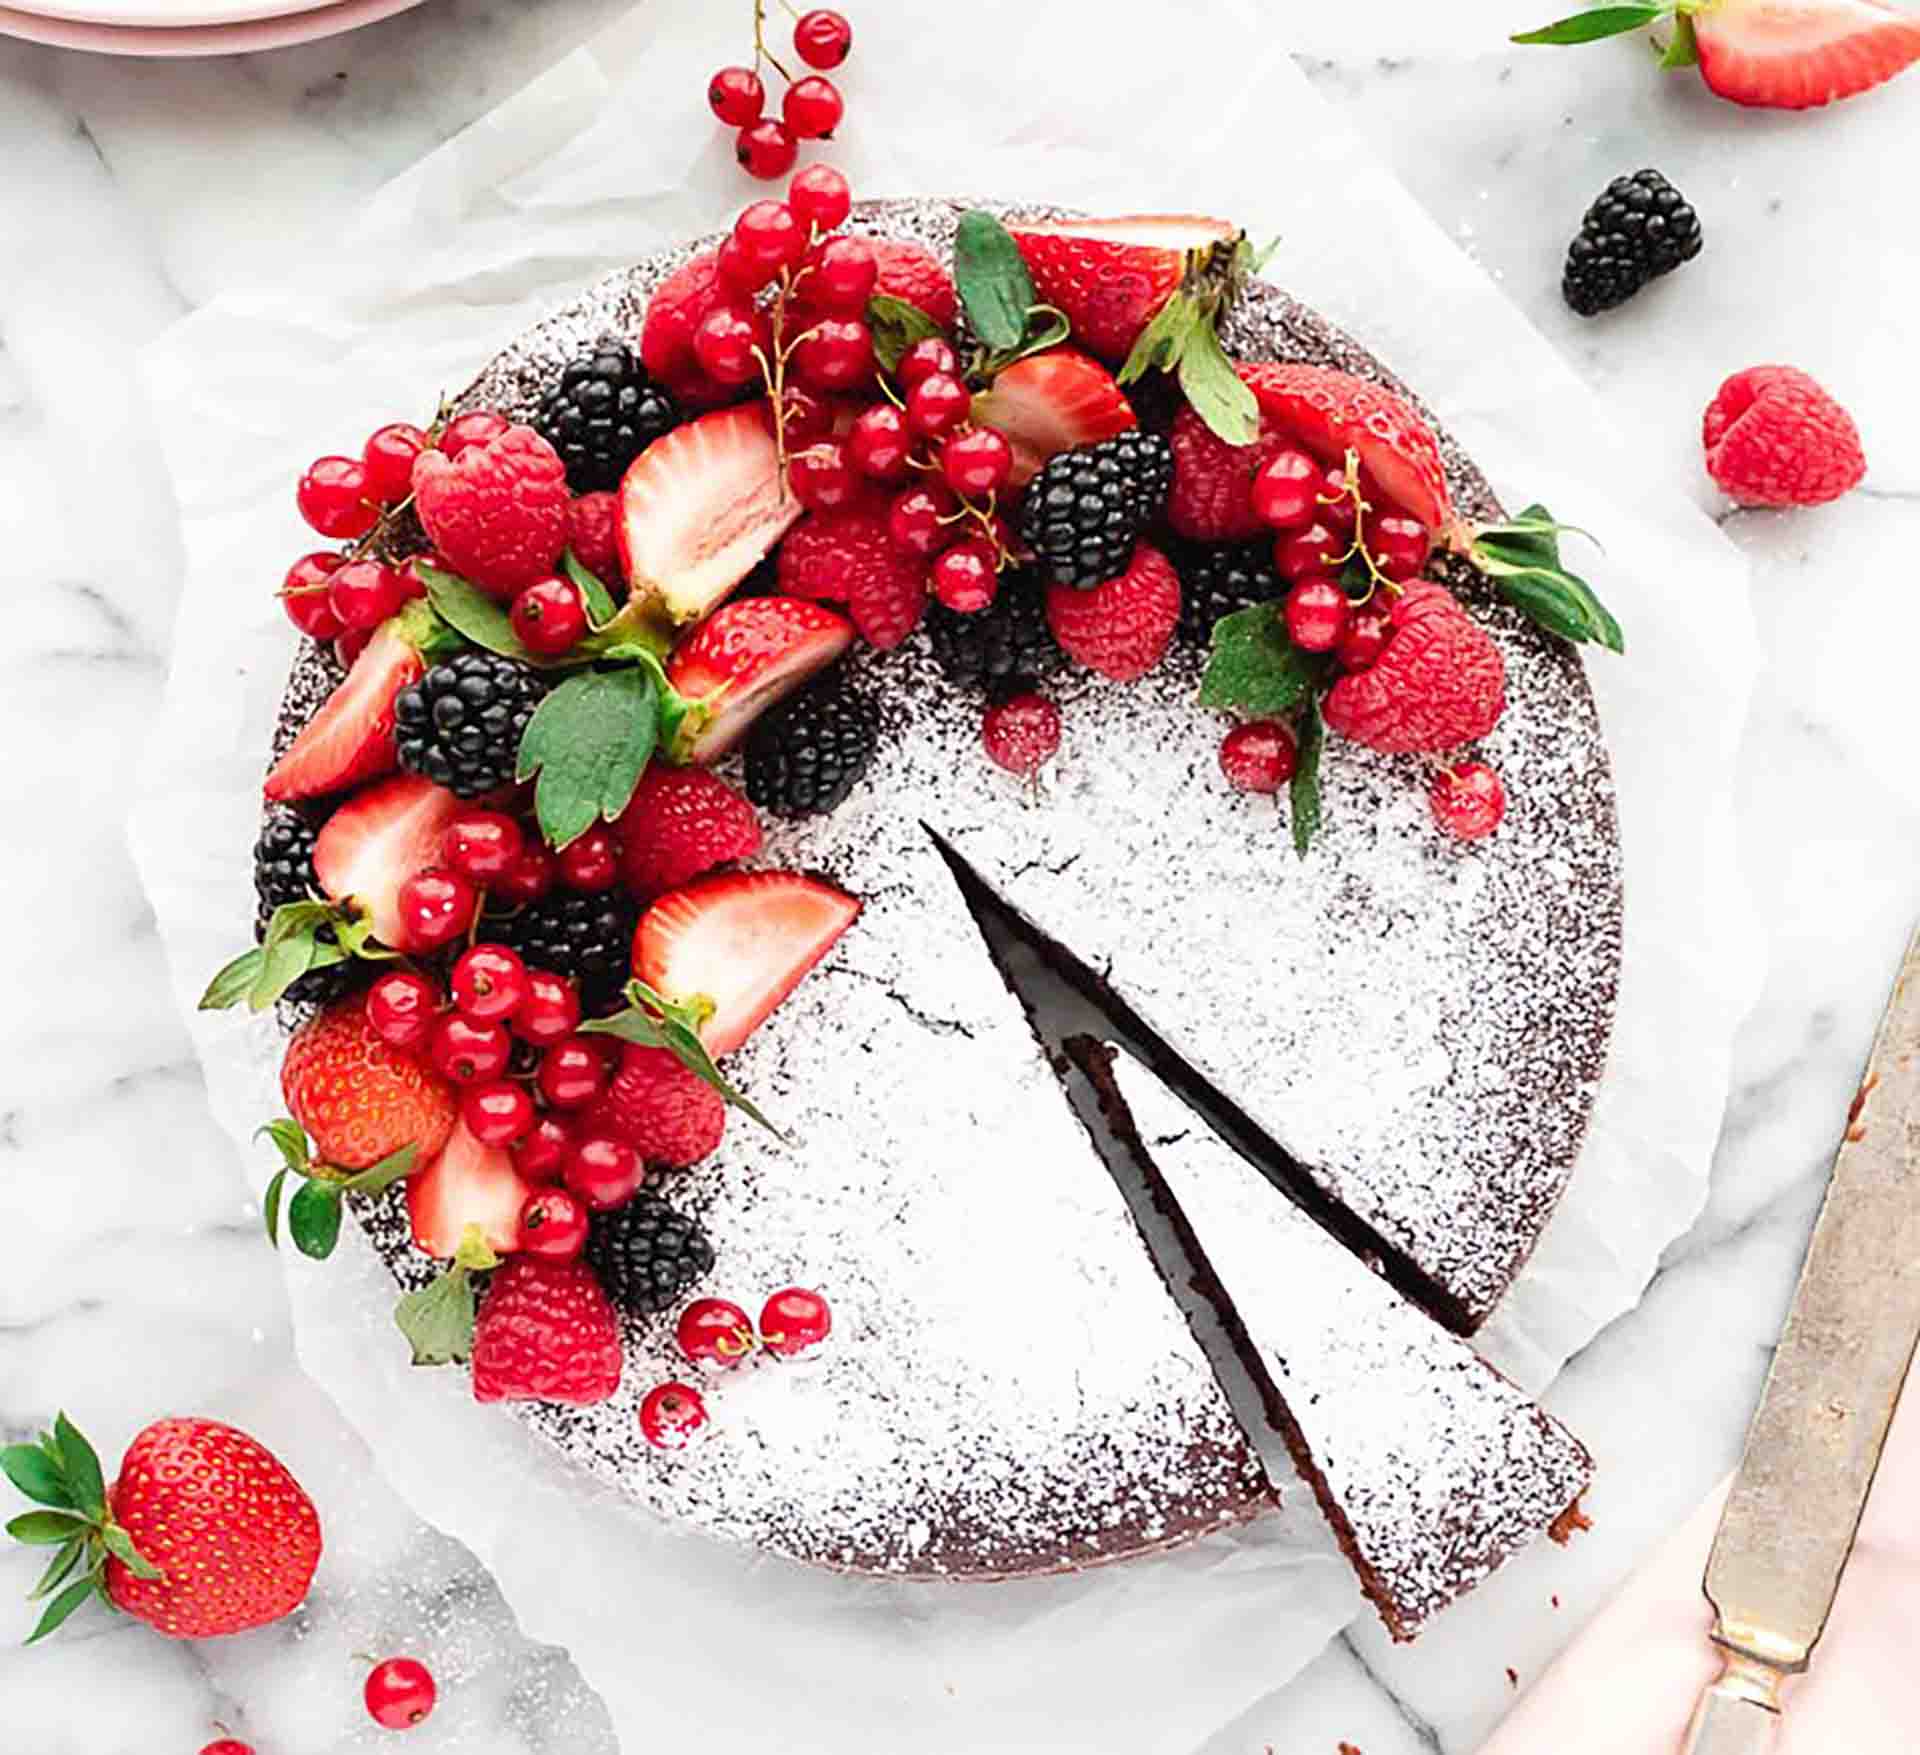 A chocolate cake decorated with various fresh fruits and dusted with powdered sugar.